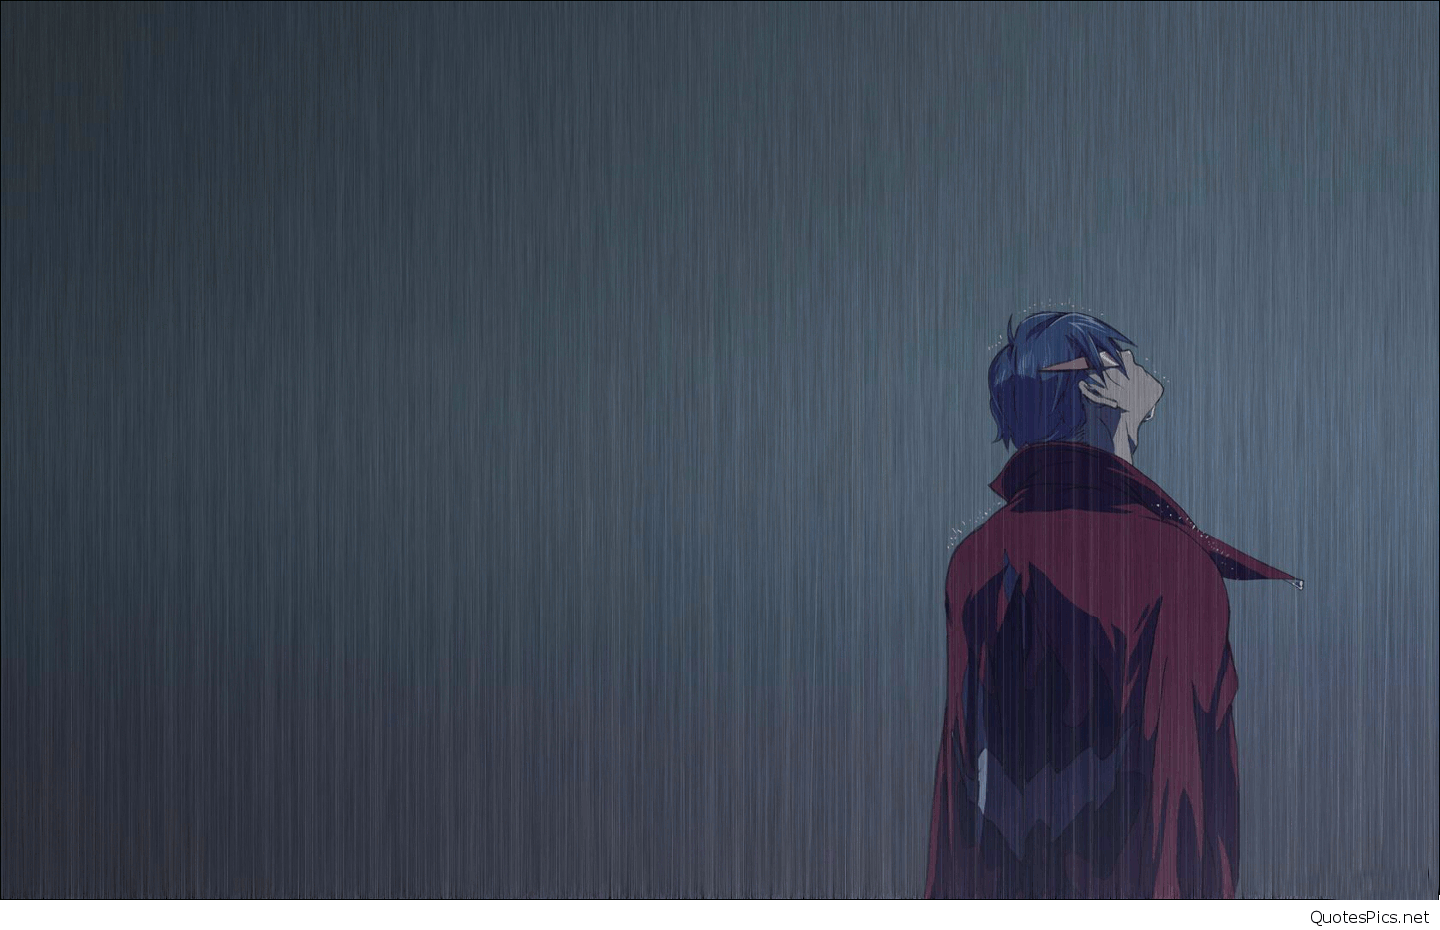 Sad Anime boy Animated Pictures for Sharing #128263611